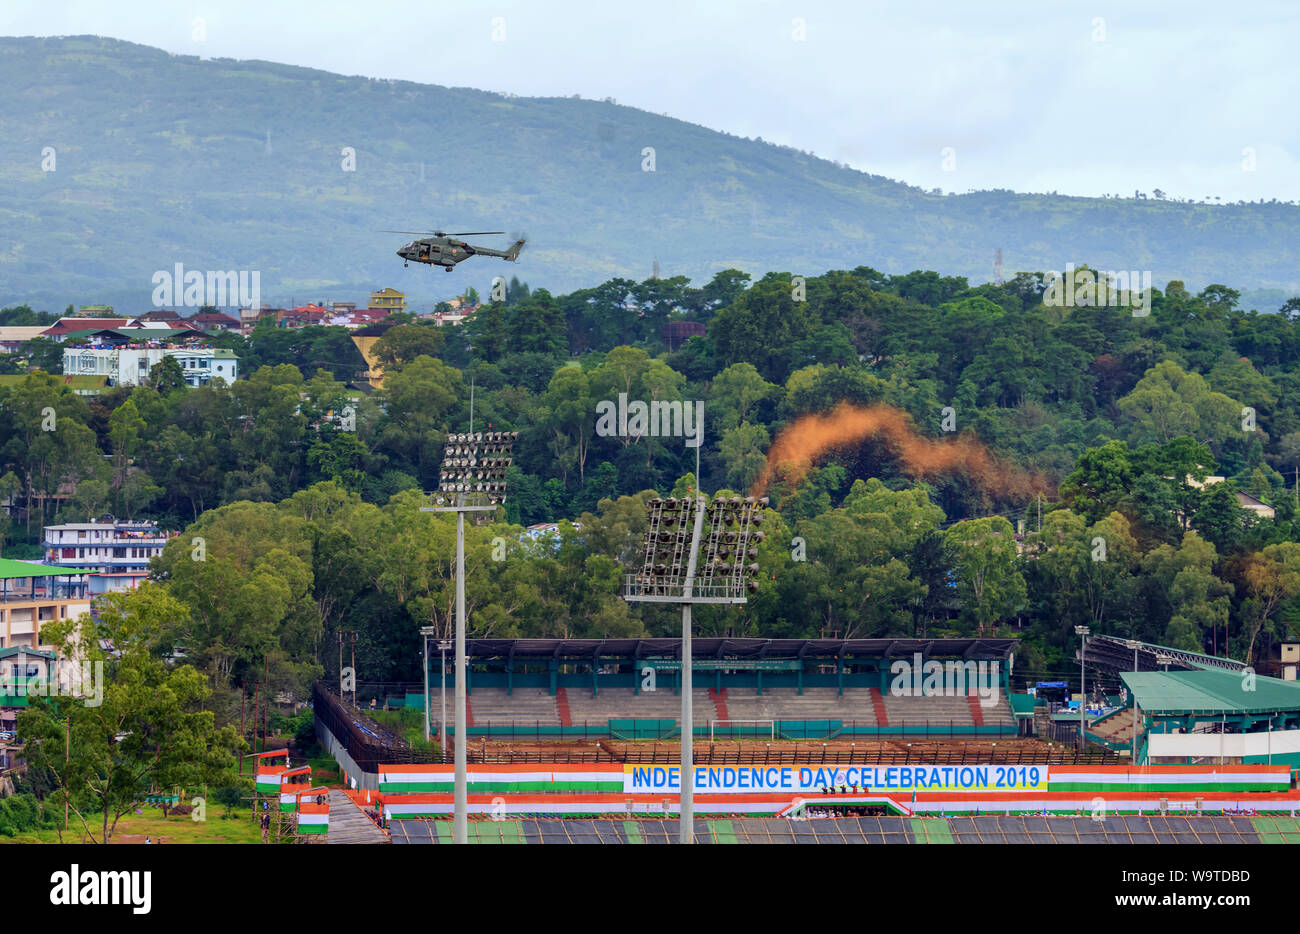 An Indian Air Force Dhruv helicopter flies away after dropping flower petals on people celebrating India's Independence Day, 15 August, 2019. Stock Photo